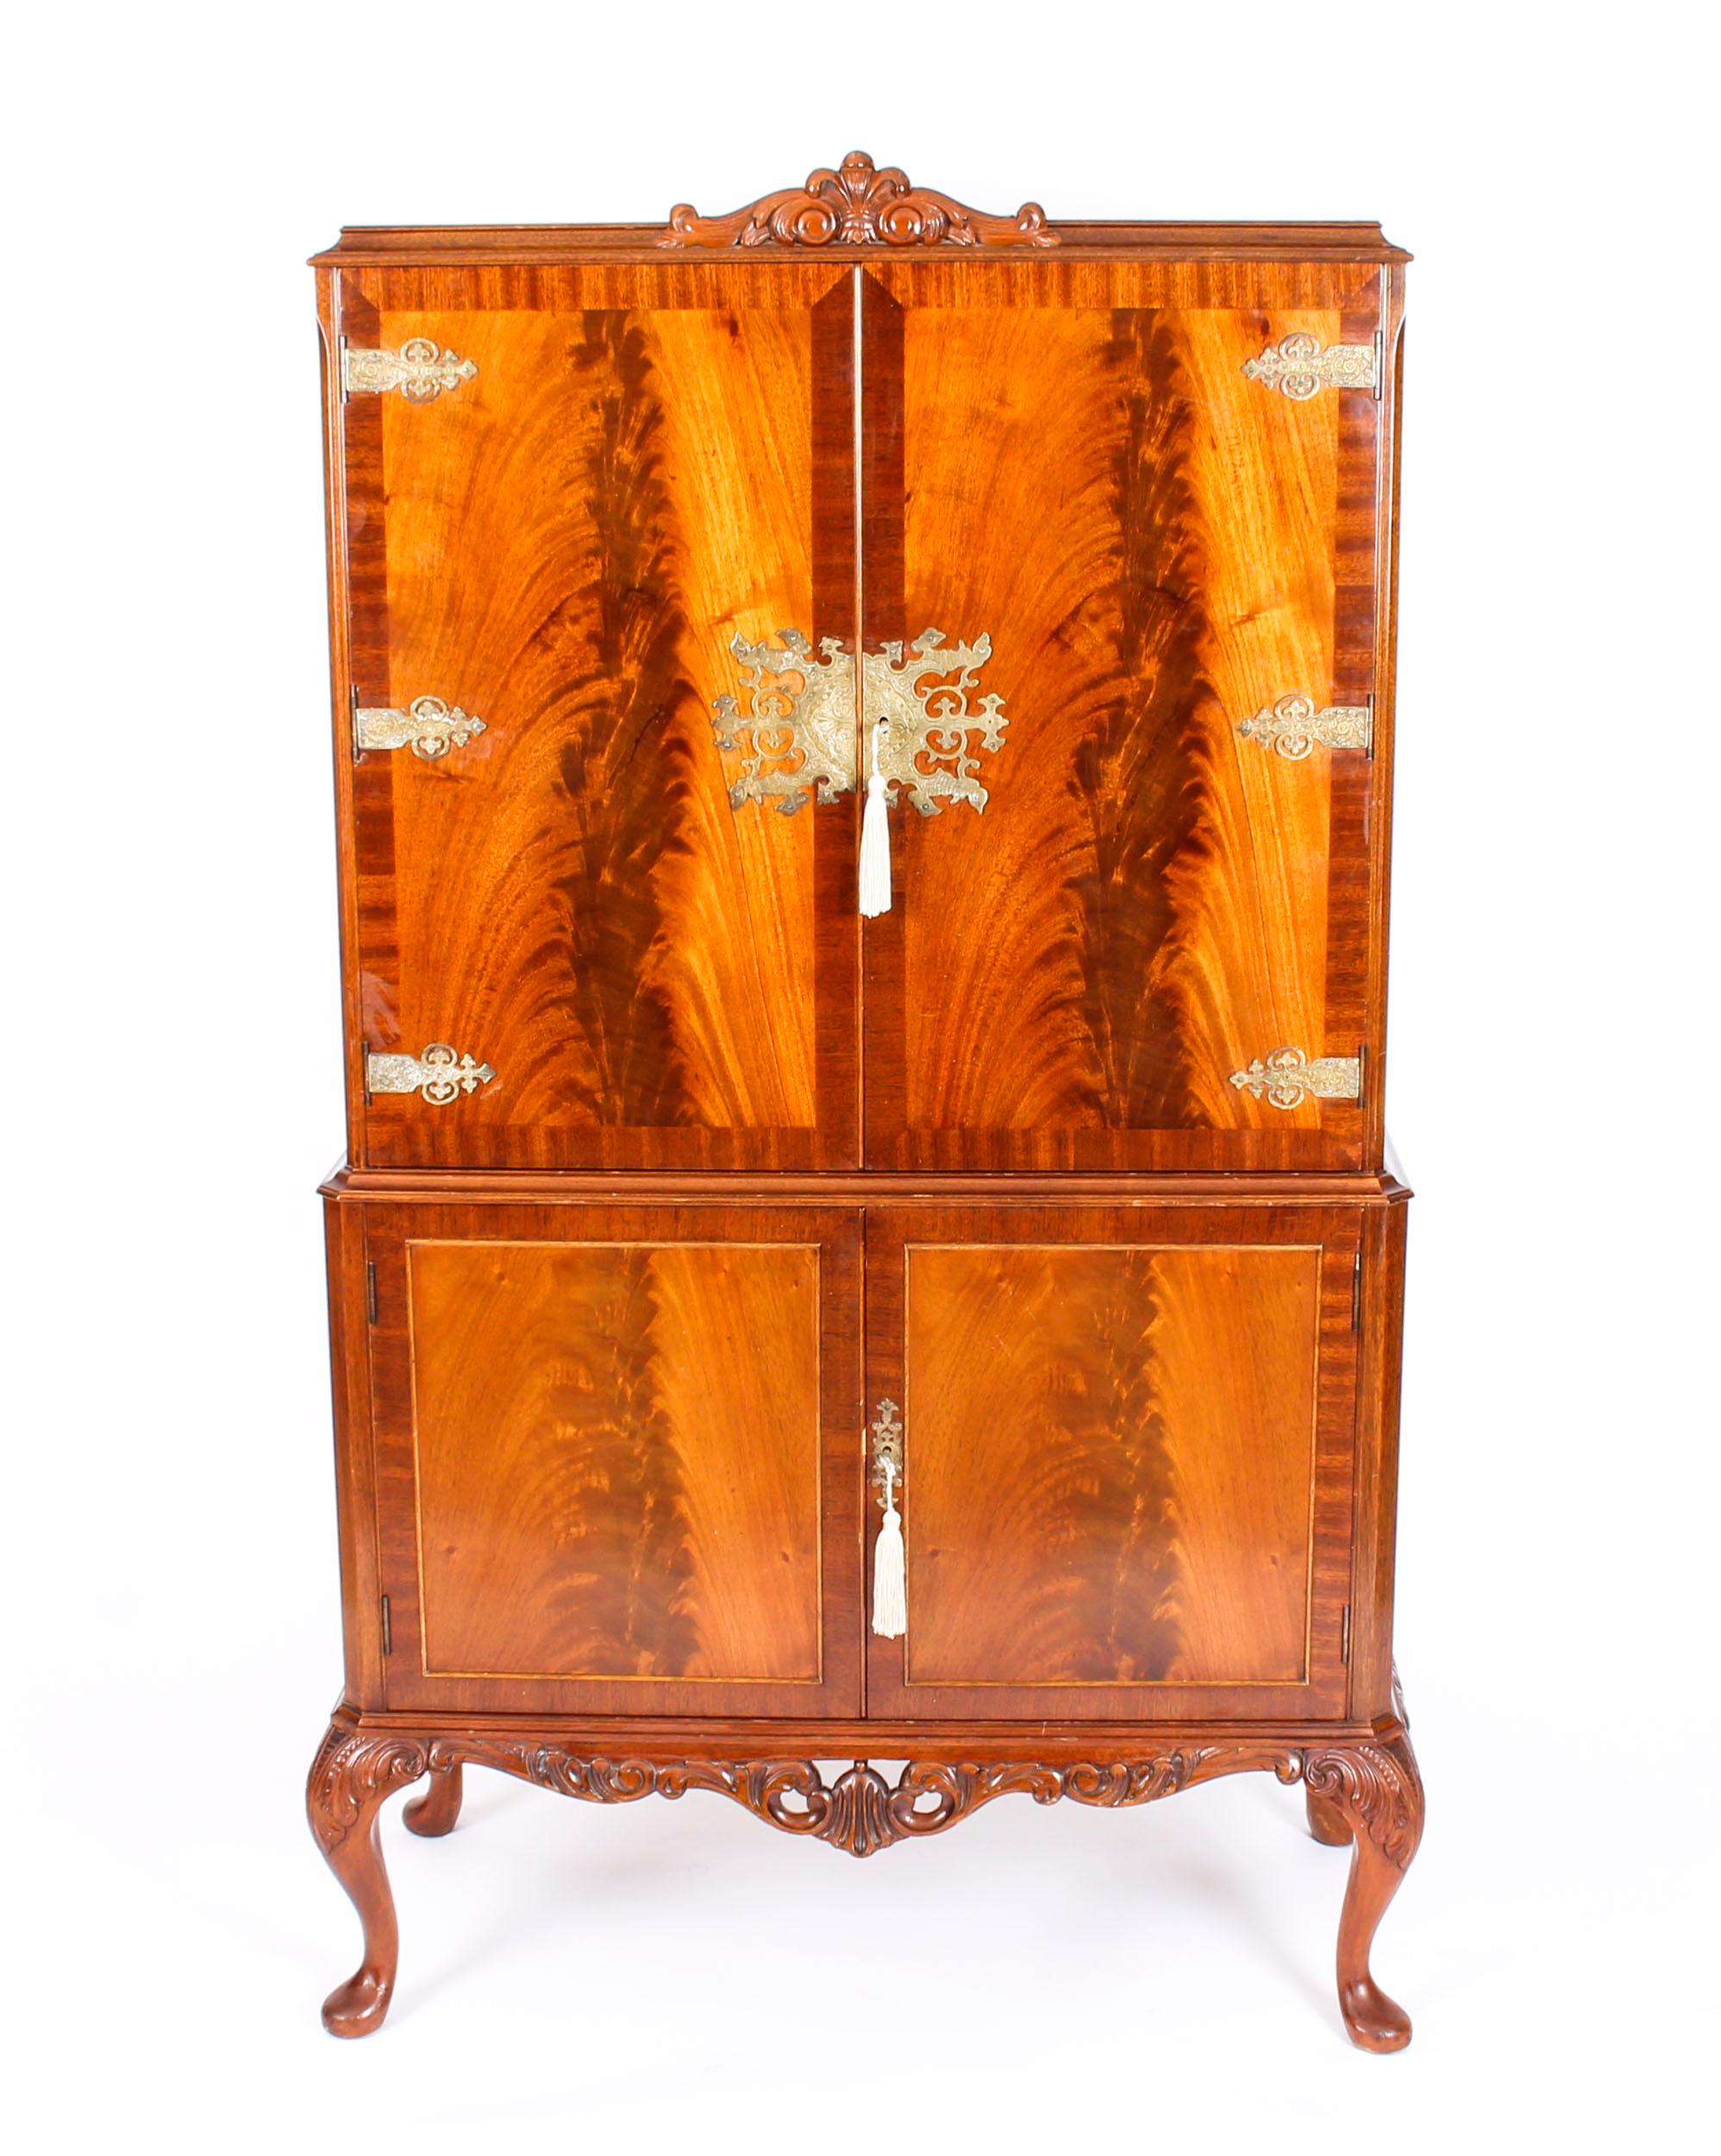 This is a fantastic vintage flame mahogany cocktail cabinet with fitted and mirrored interior and Ormolu mounts, dating from the mid-20th century.

The upper part comprises a pair of doors that have beautiful small shelves with brass galleries on